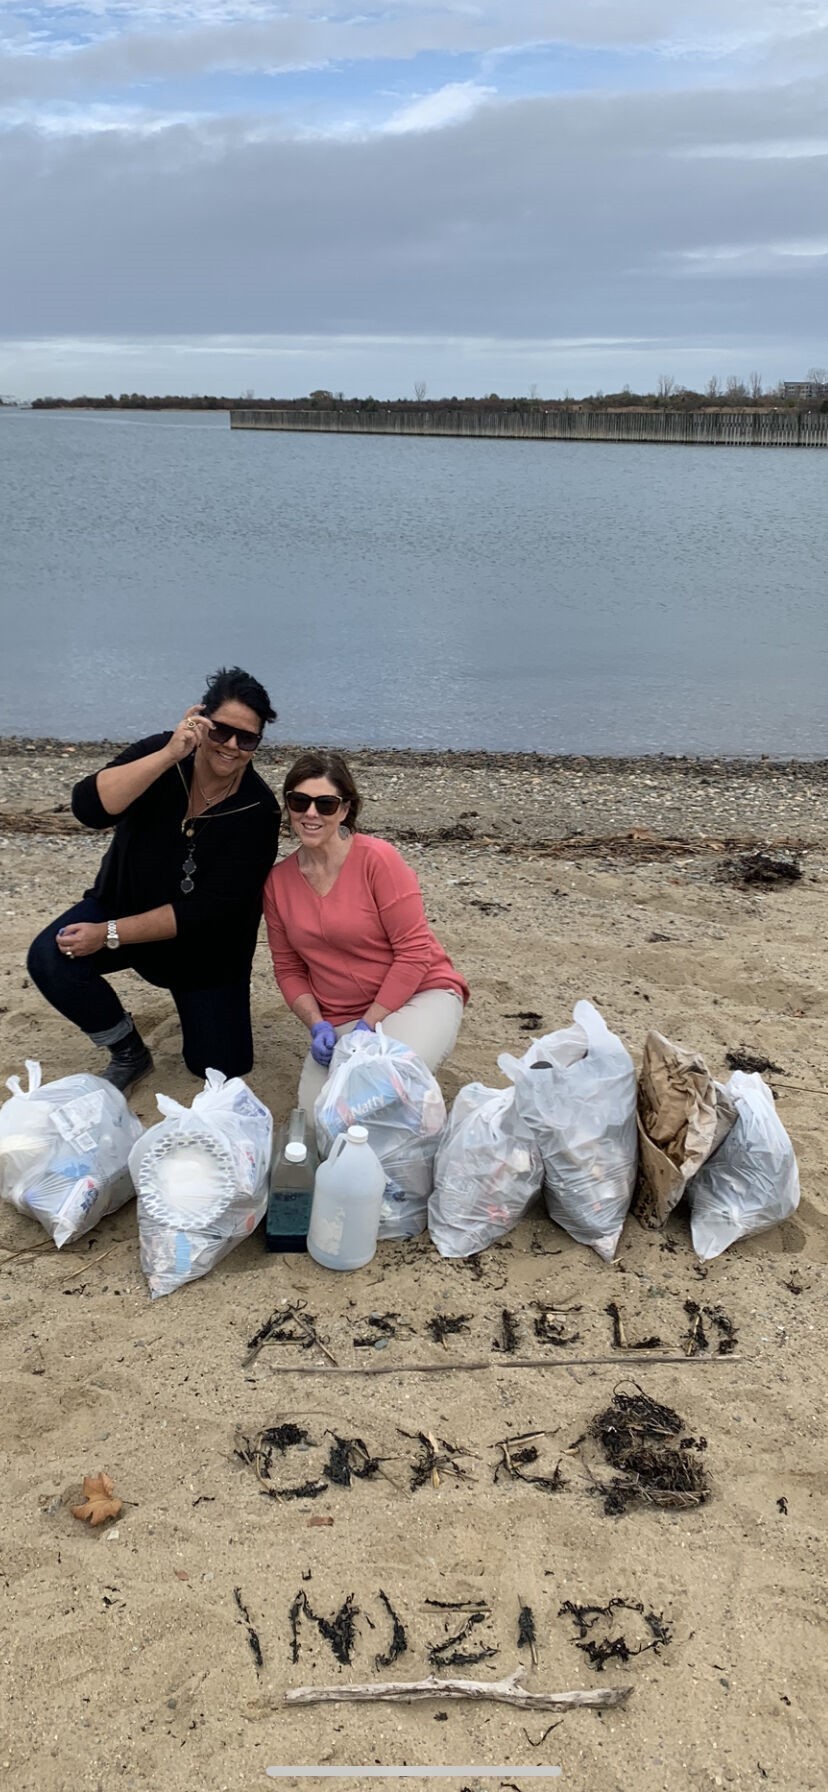 Community Action Day - clean the beach